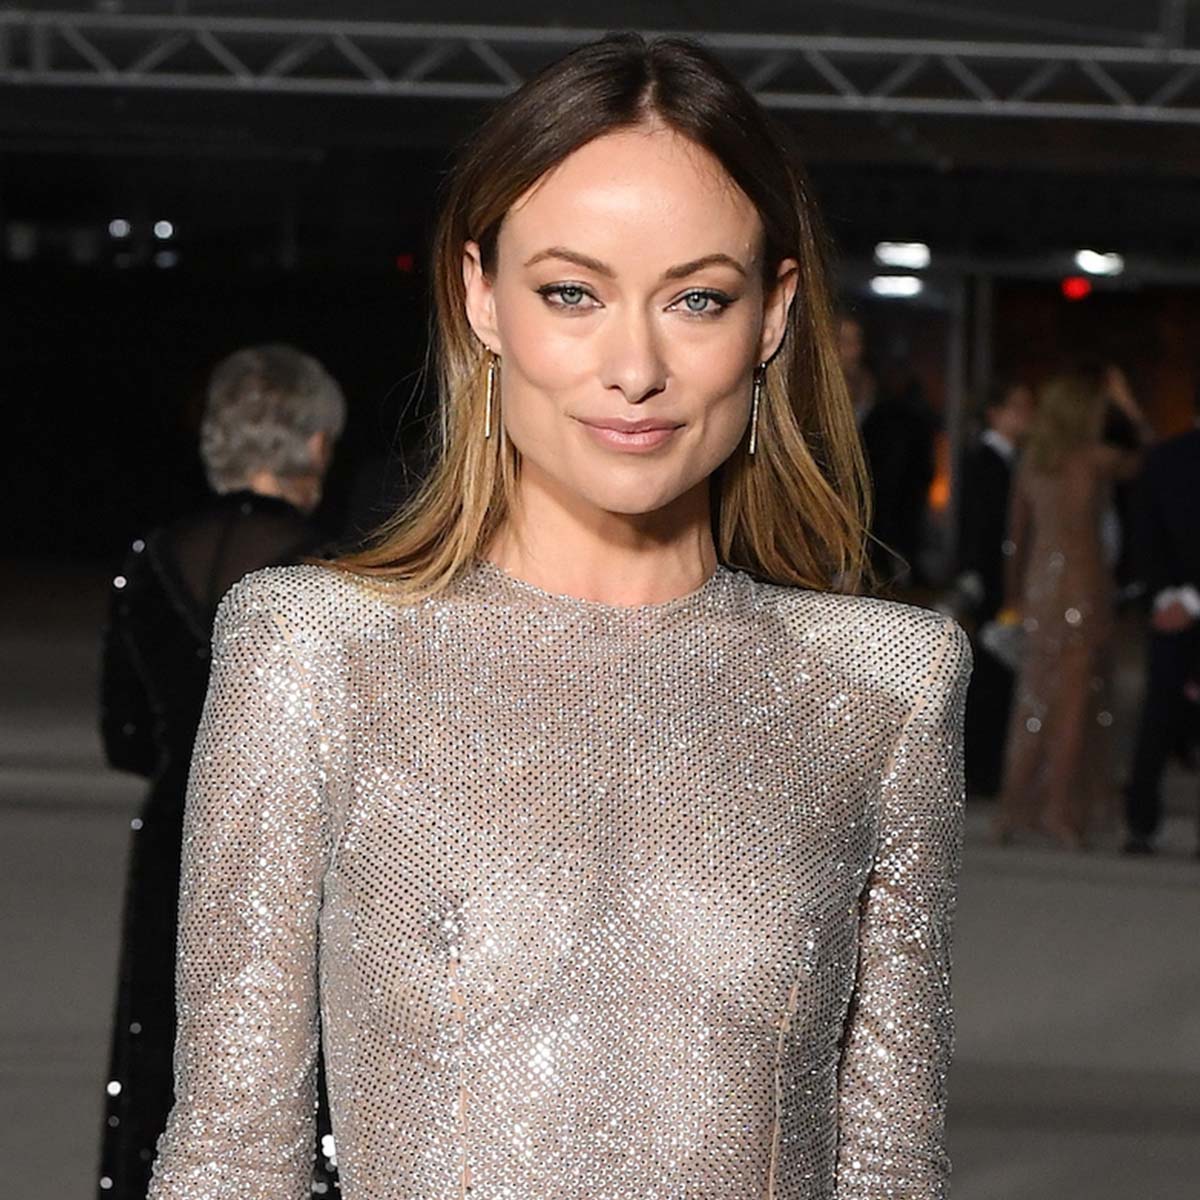 Olivia Wilde Wore a Sheer Crystal Gown on the Red Carpet